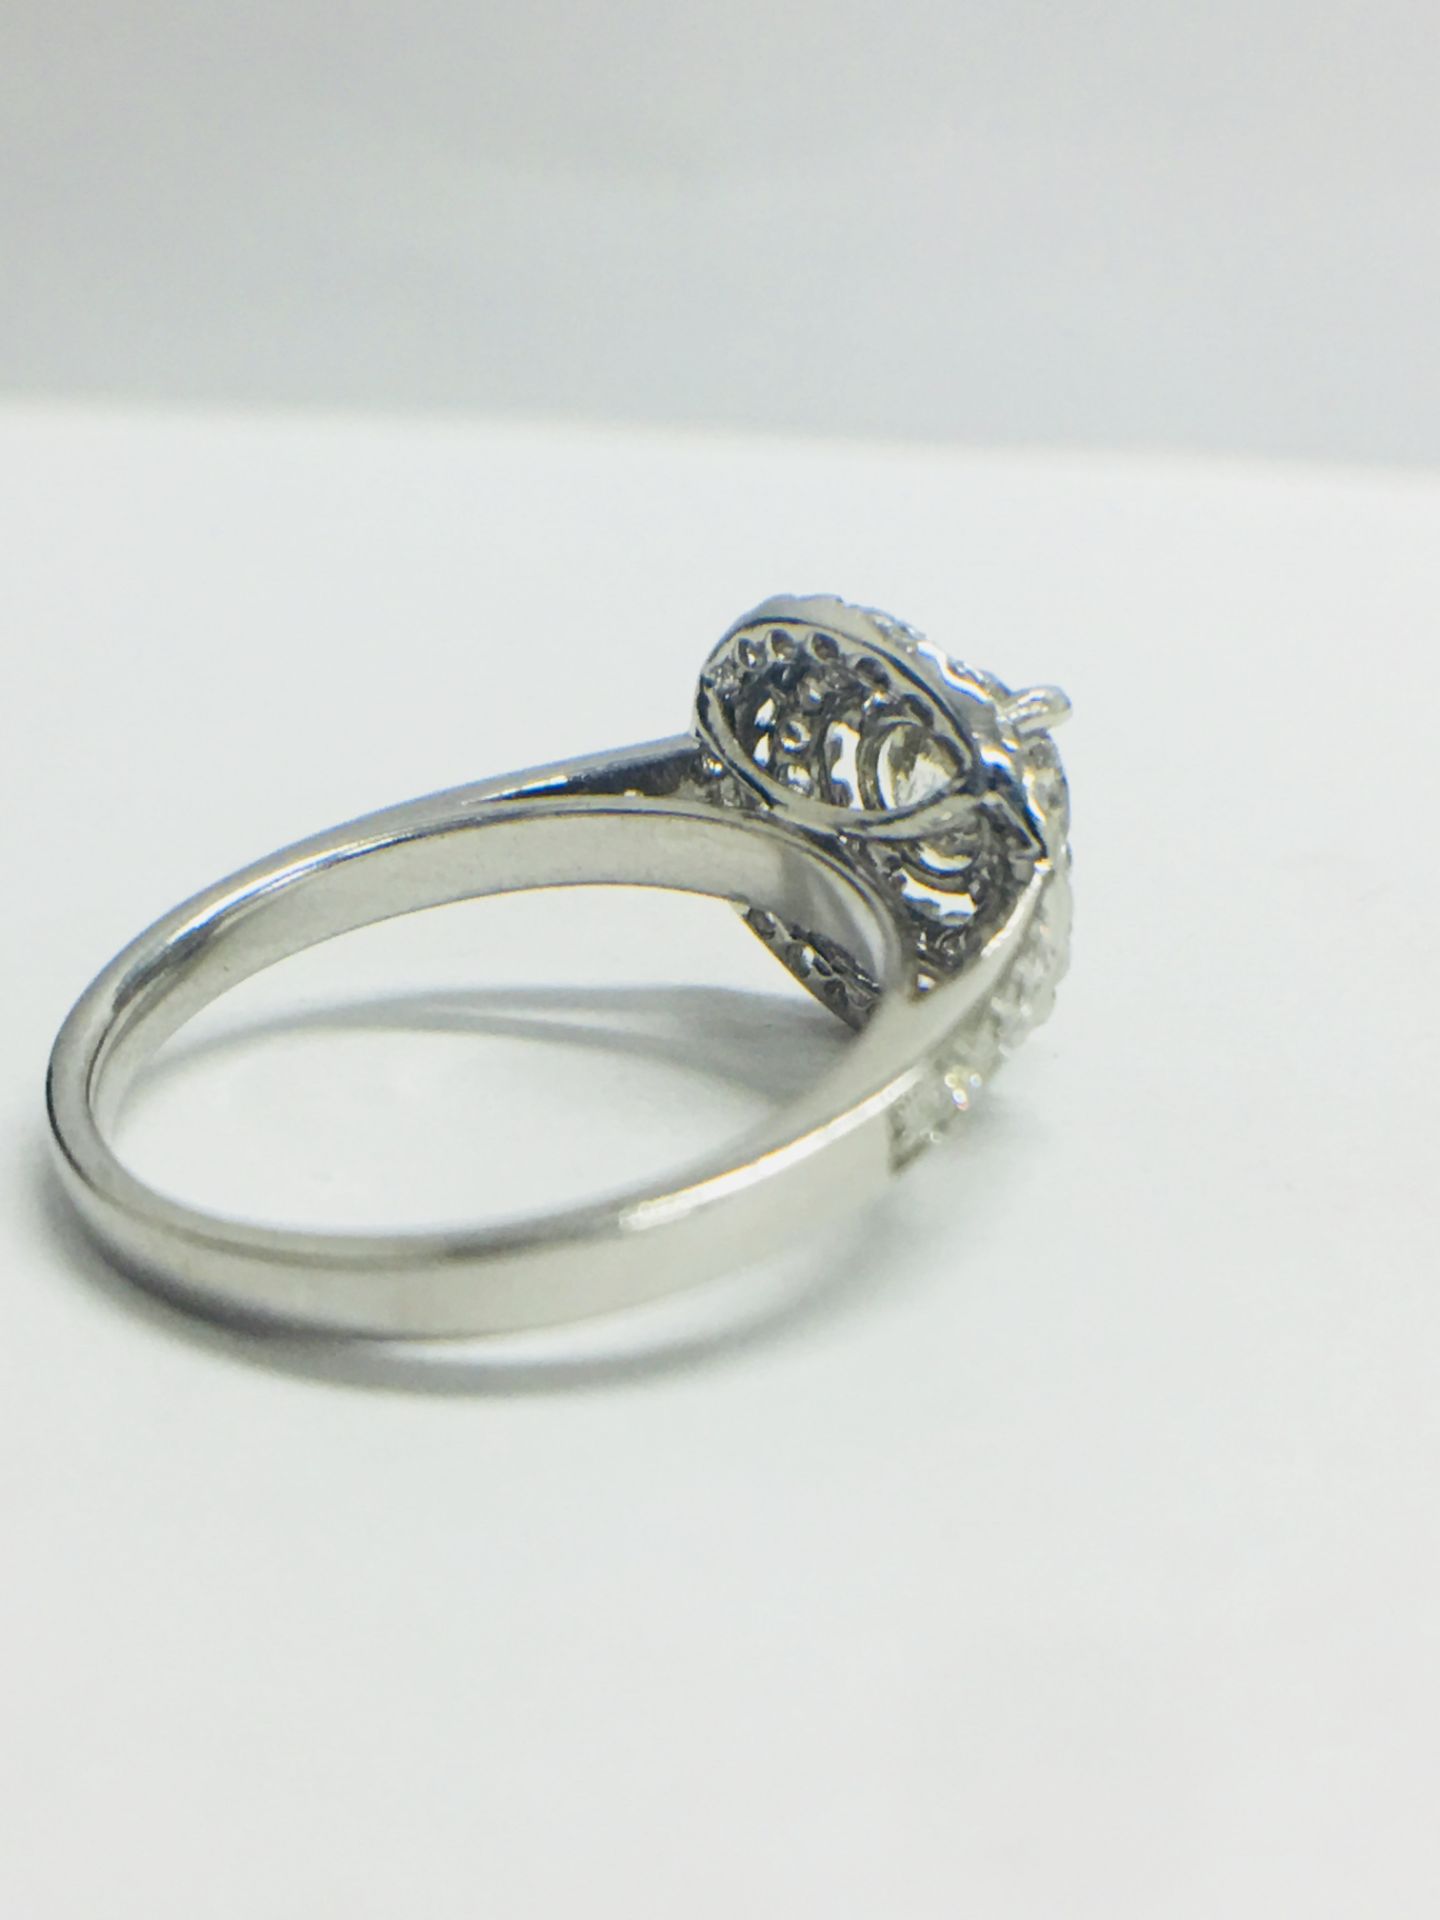 Platinum Double Halo Style Ring1.40Ct Total Diamond Weight, - Image 7 of 11